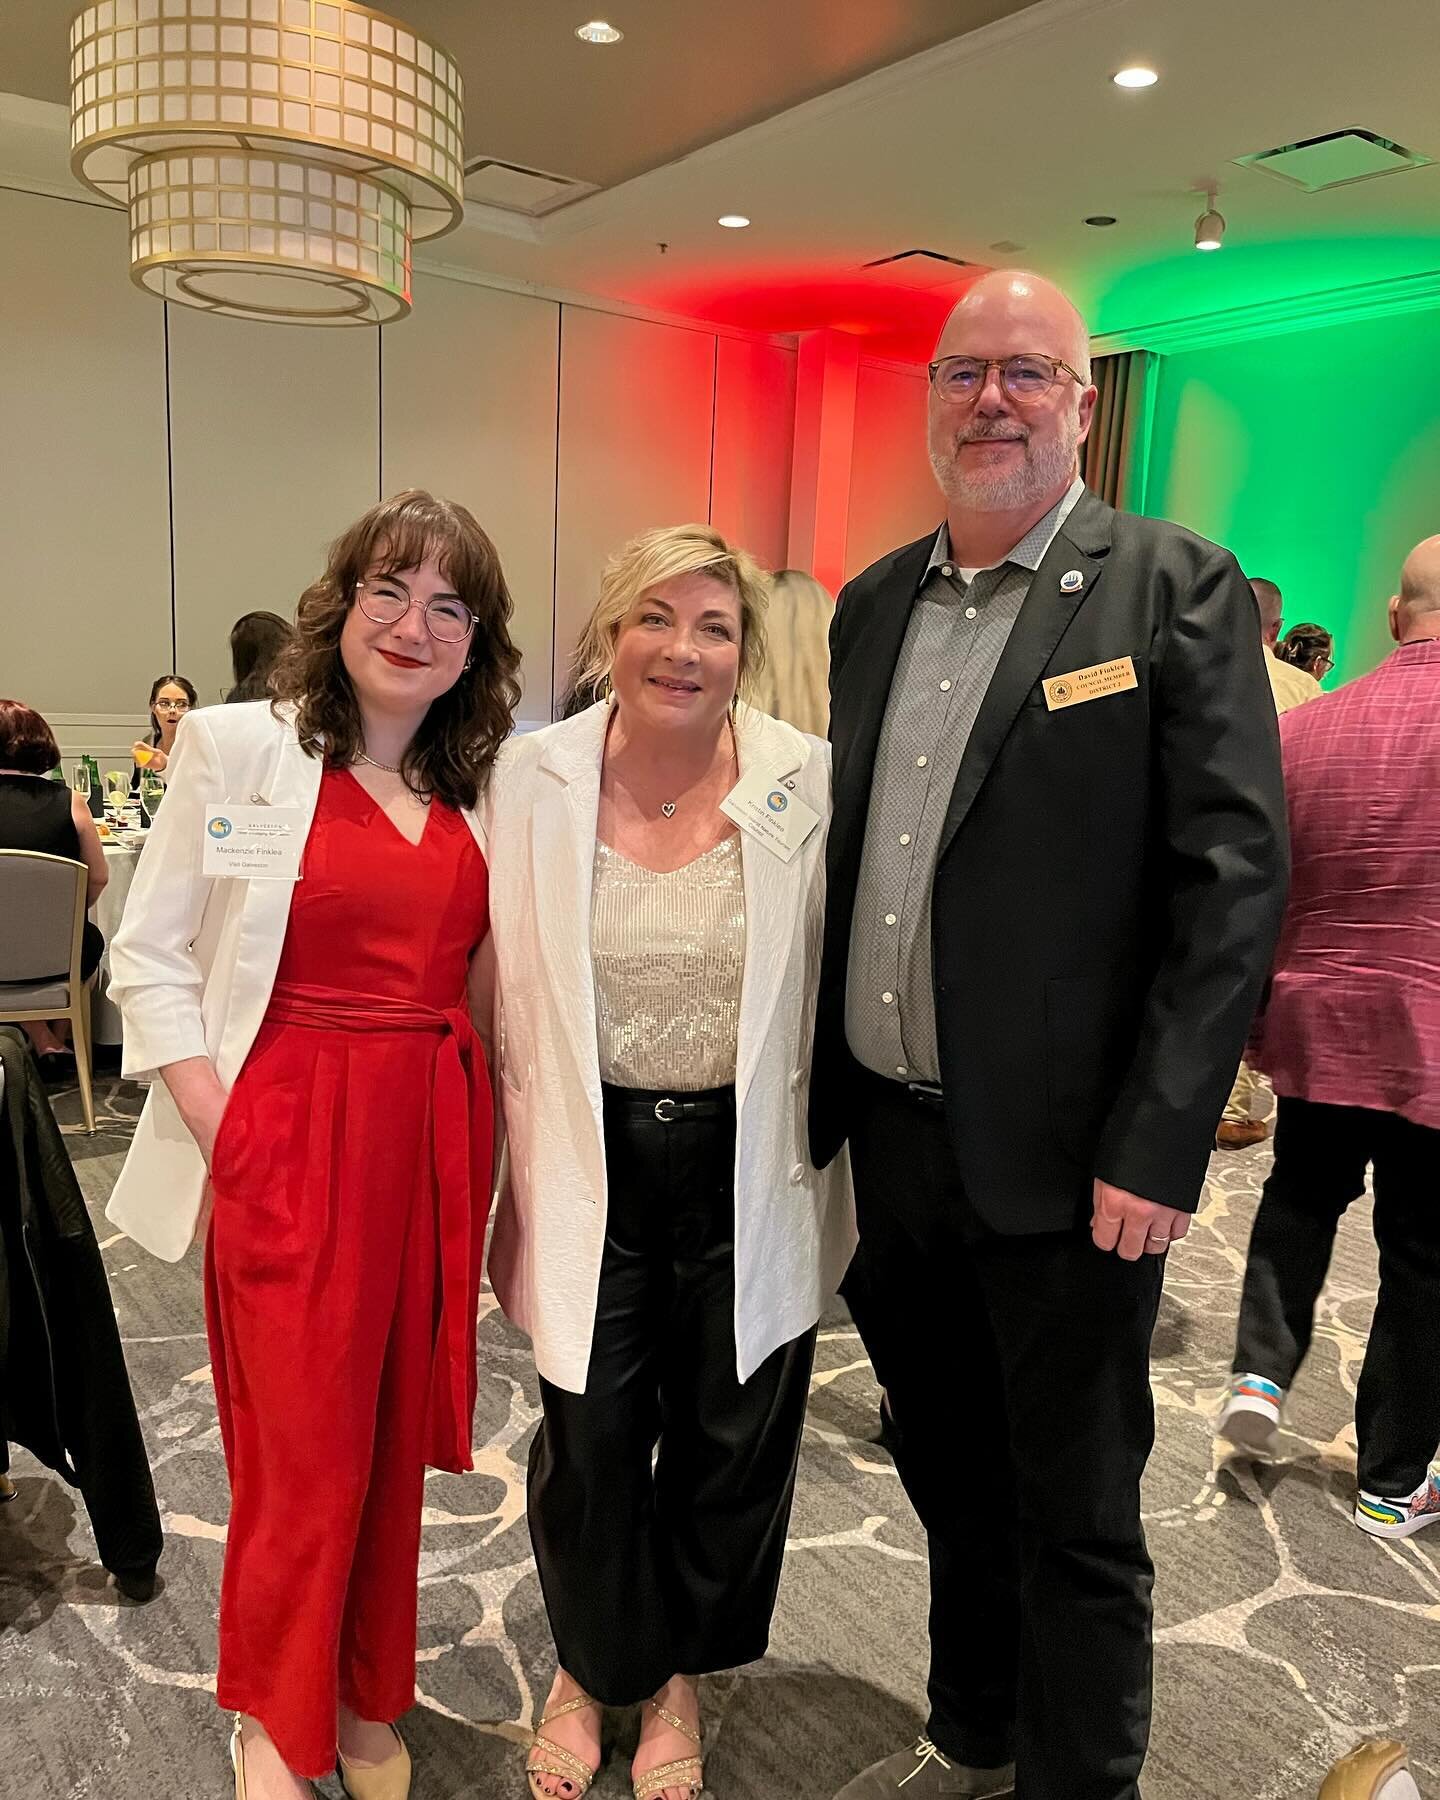 Celebrating with the Galveston Hotel and Lodging Association.  With over 25% of the properties in District 2 registered as short term rentals or hotel properties, we work collaboratively to balance tourism and quality of life for our residents. #galv